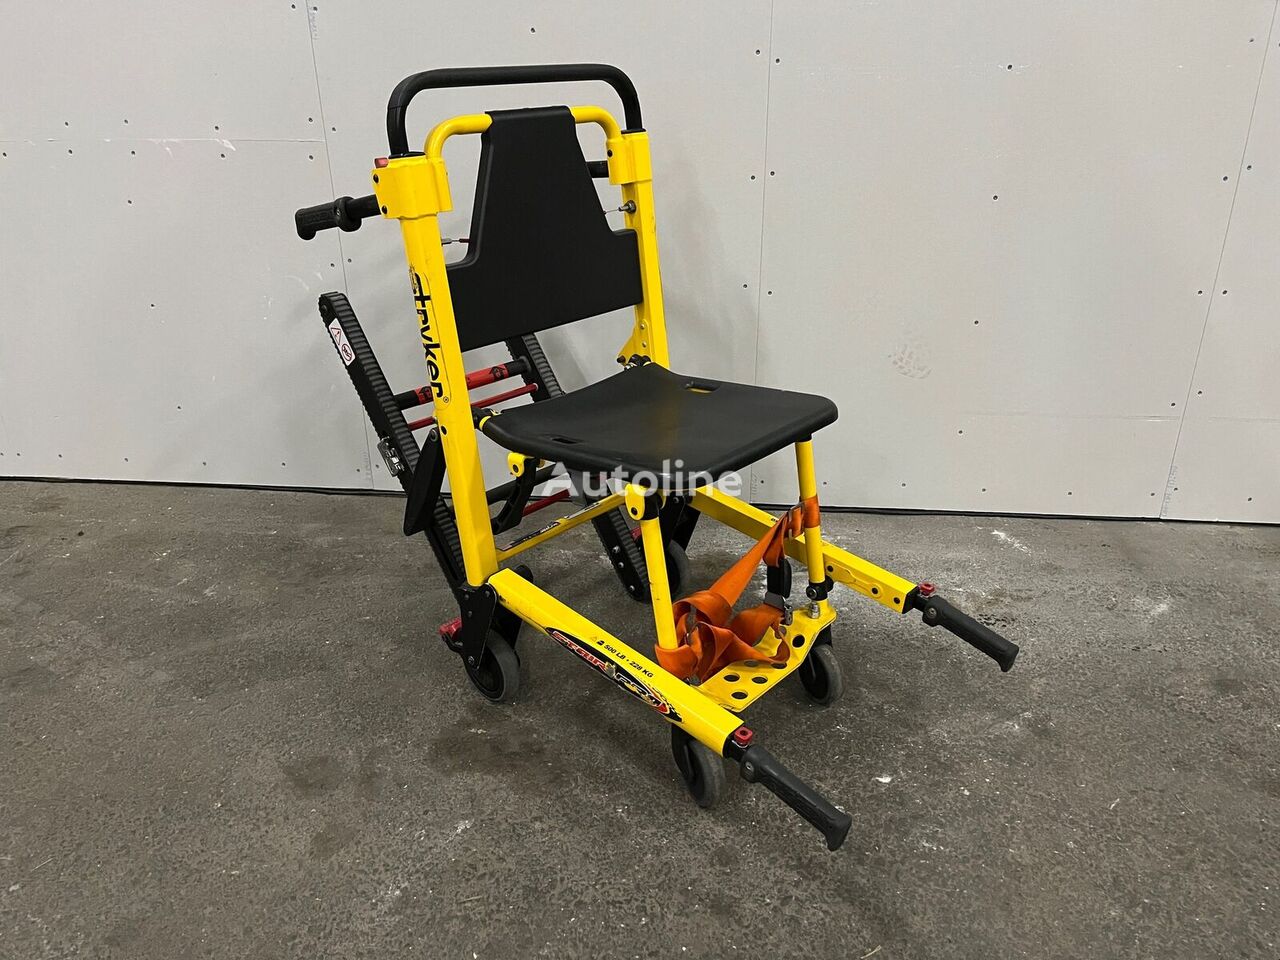 ambulance Carry chair - Stryker Prostair 6252